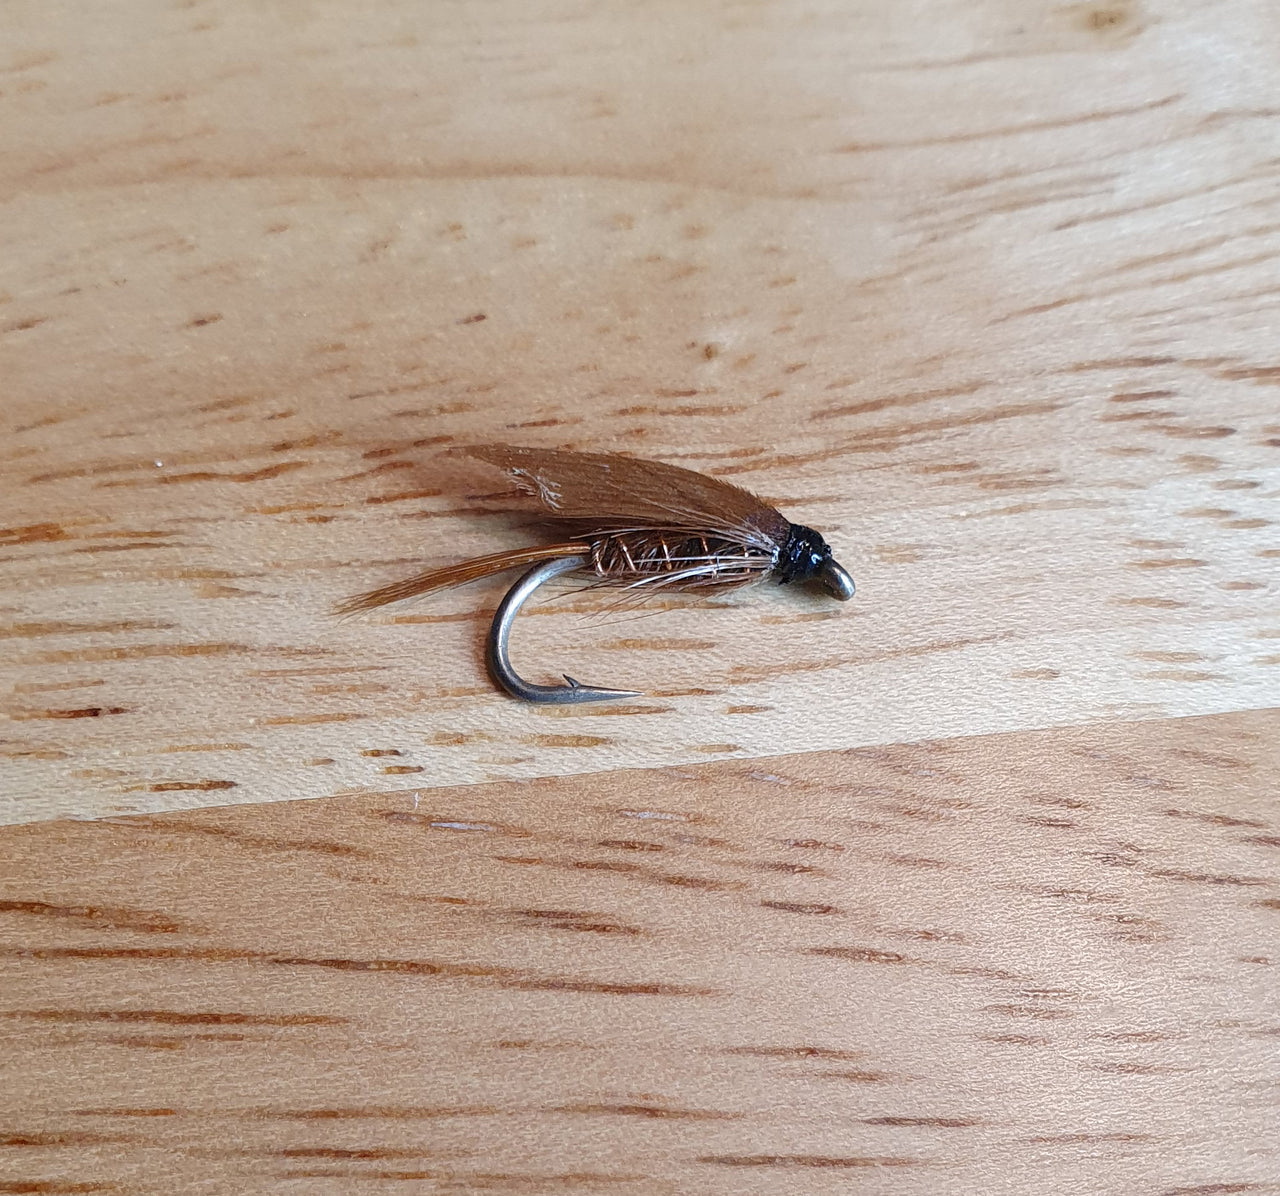 Pheasant Tail wet fly